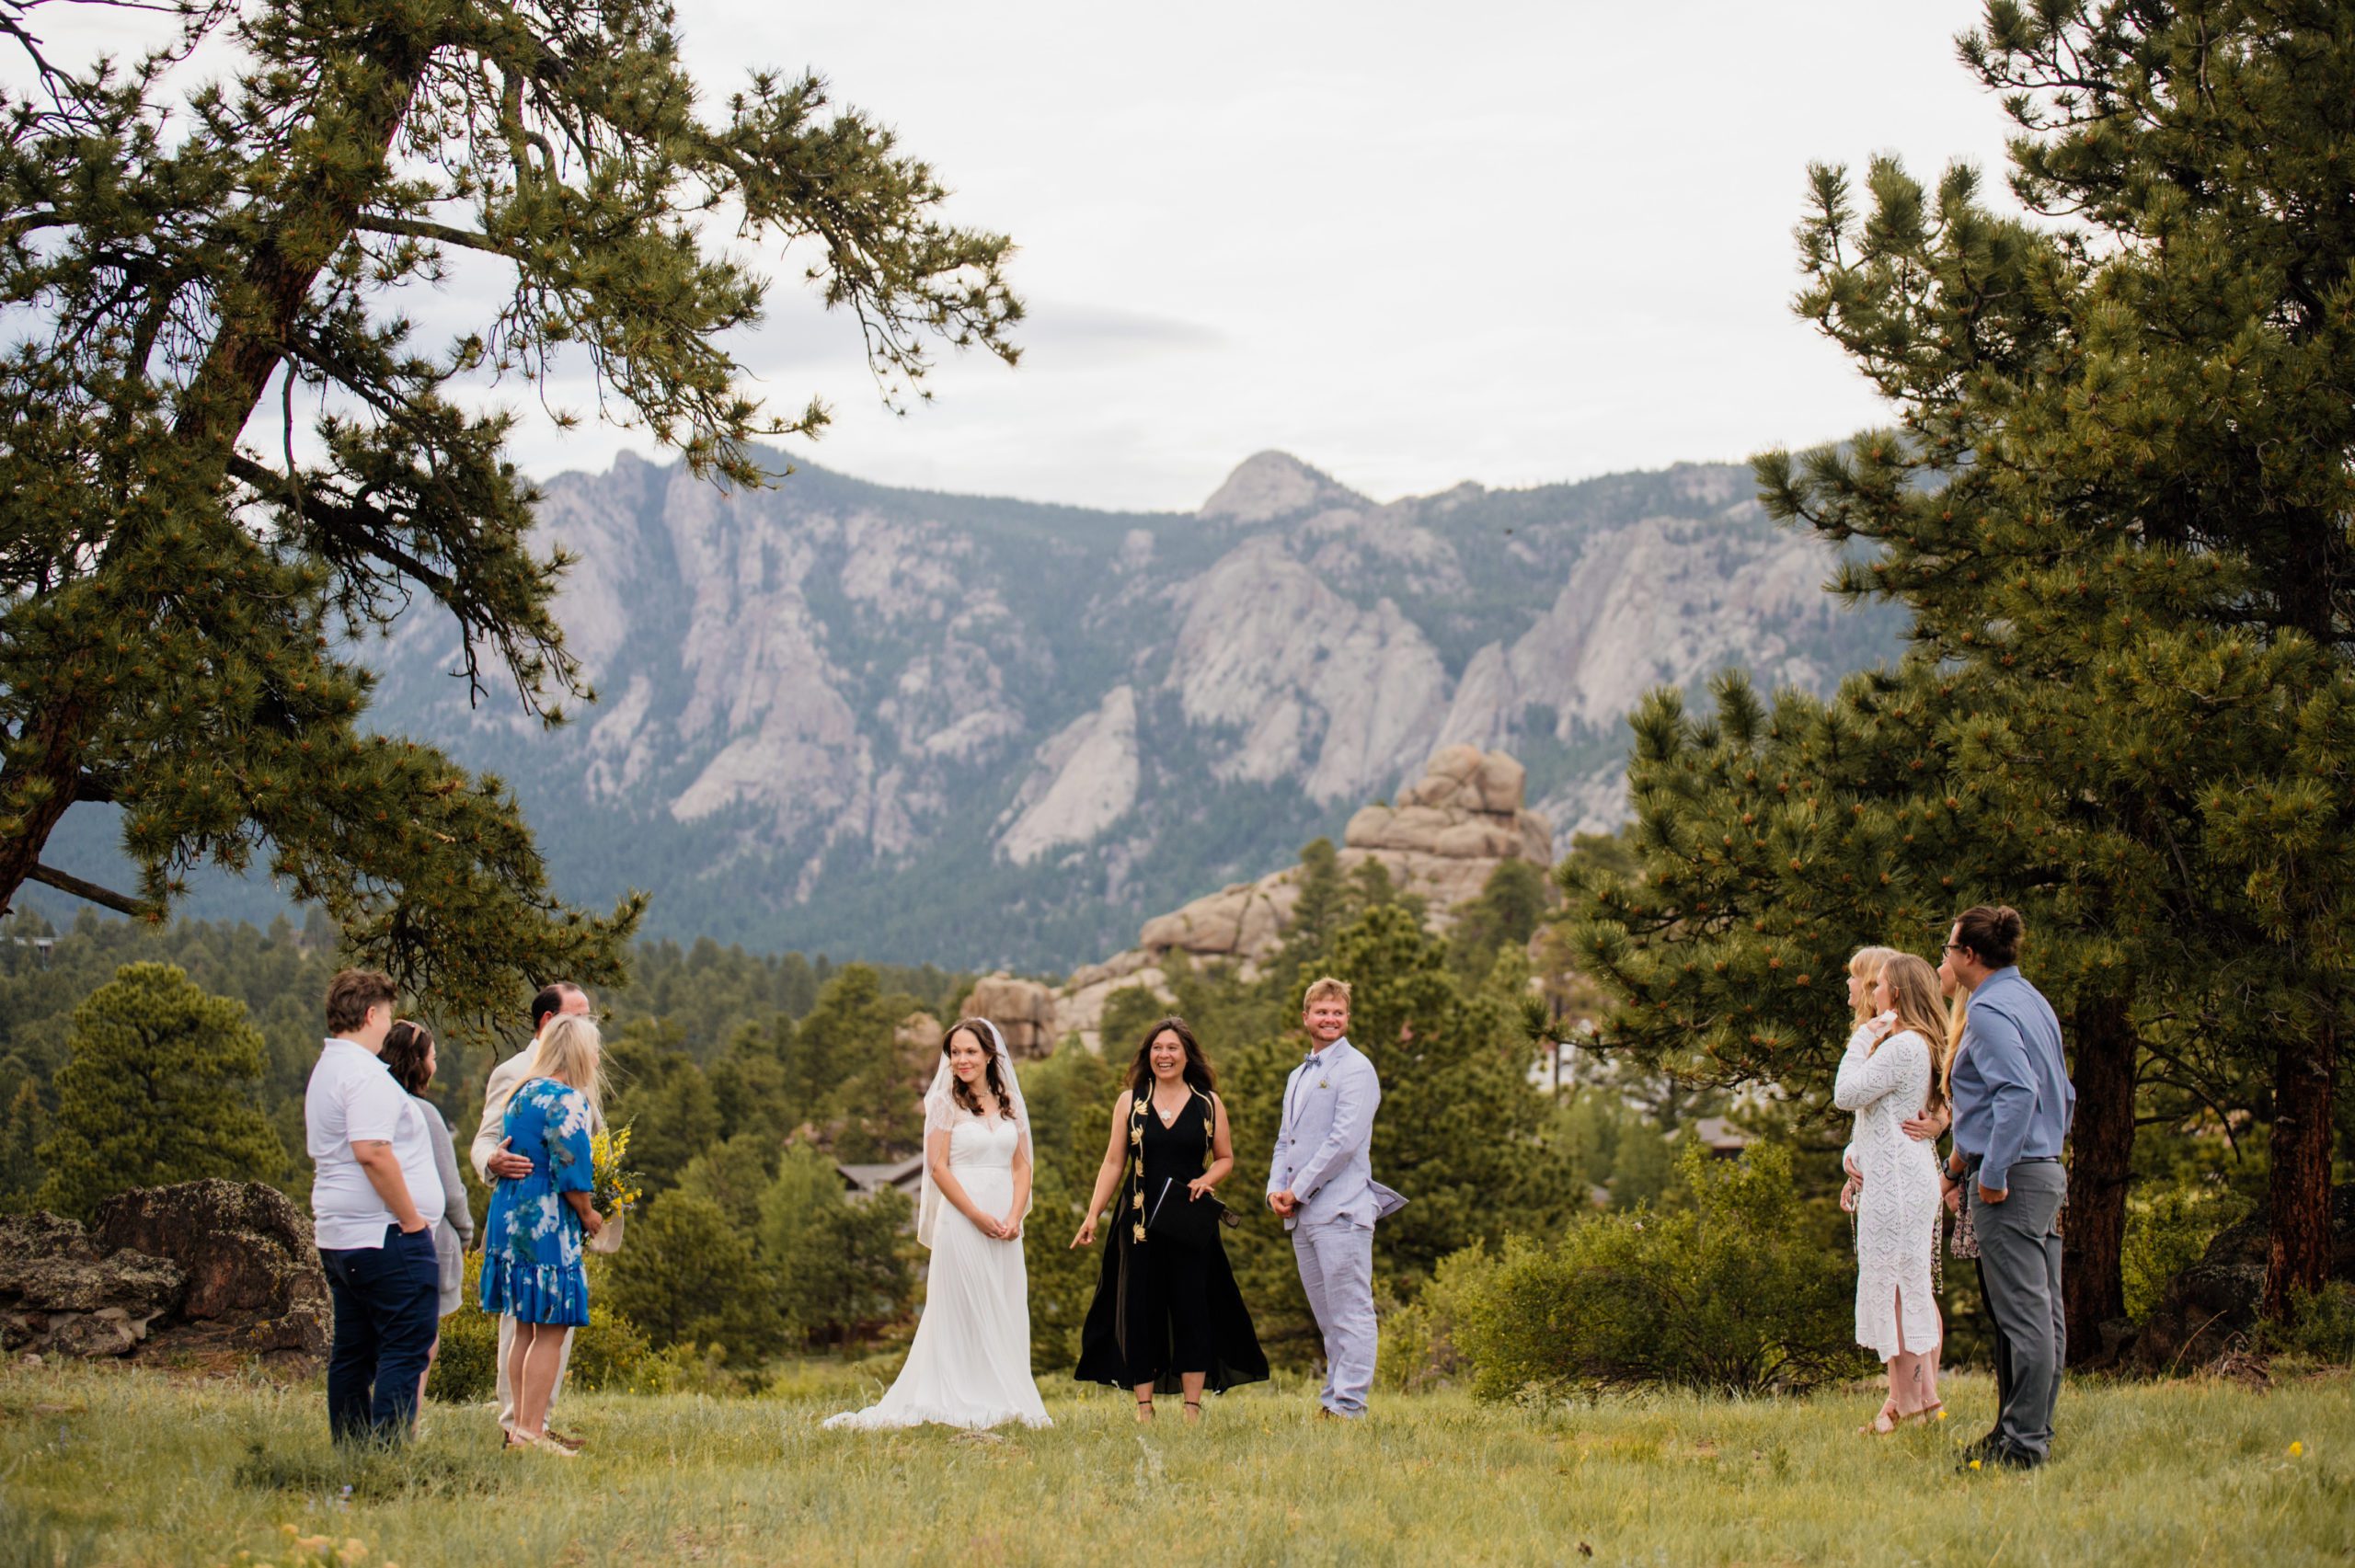 The bride and groom look back at their guests, soaking in the moment at their Knoll Willows elopement at Estes Park 